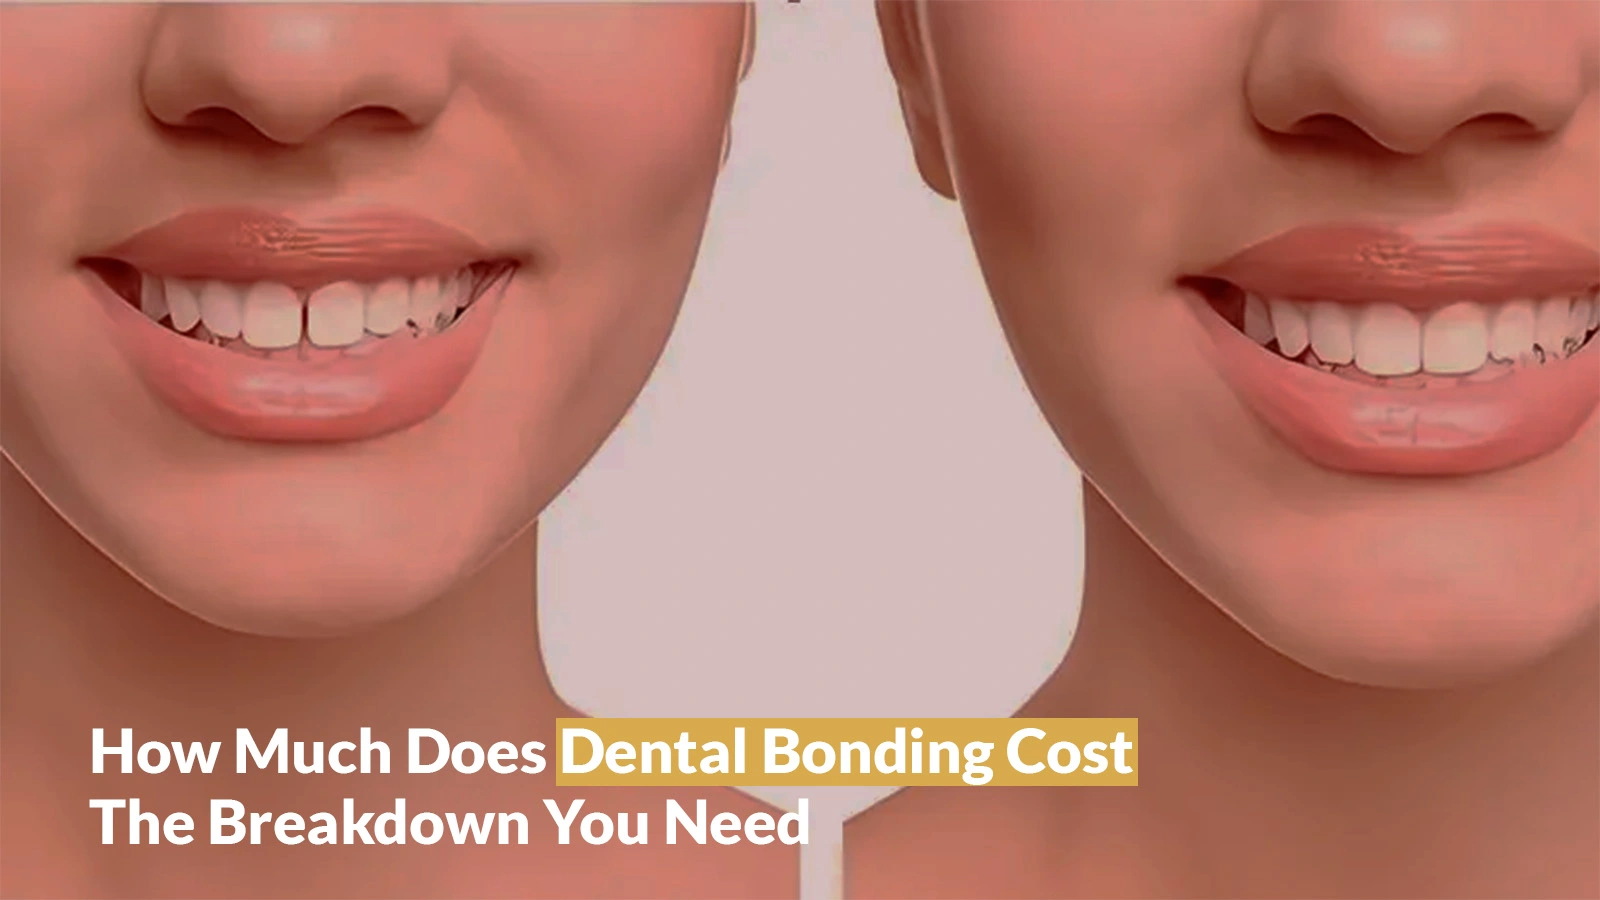 How Much Does Dental Bonding Cost: The Breakdown You Need